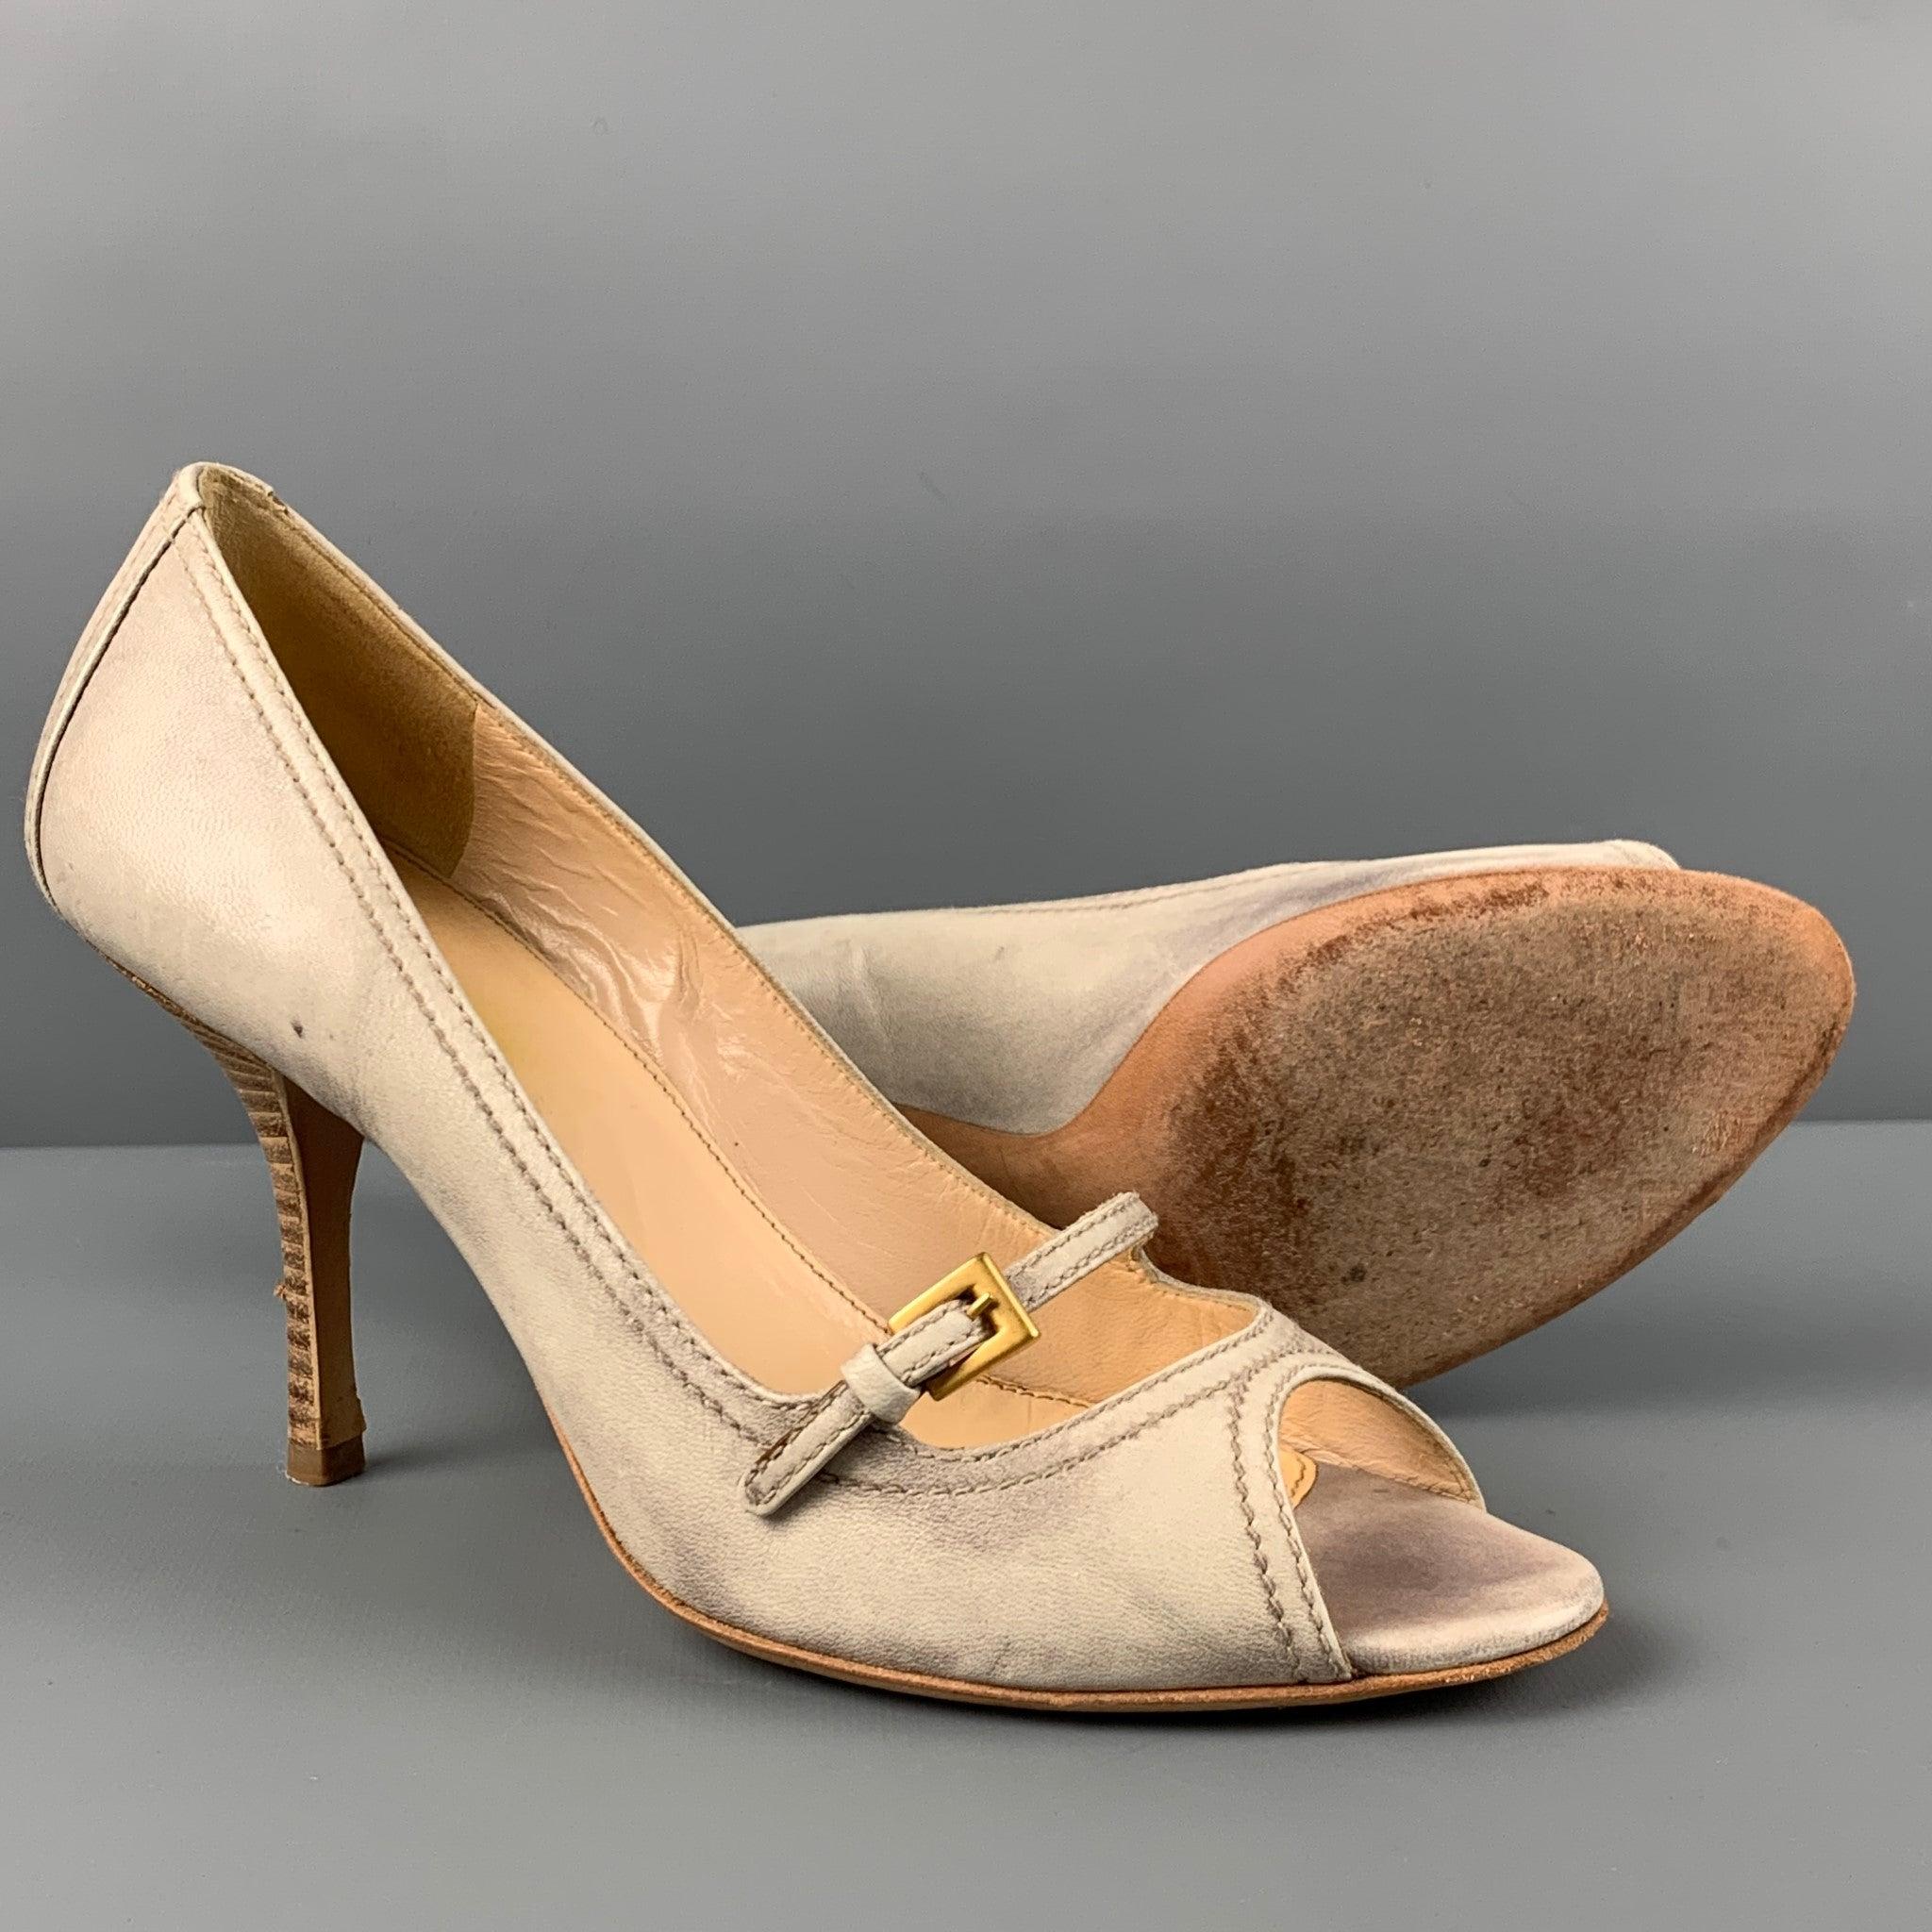 PRADA Size 7 Beige Leather Marbled Peep Toe Pumps In Good Condition For Sale In San Francisco, CA